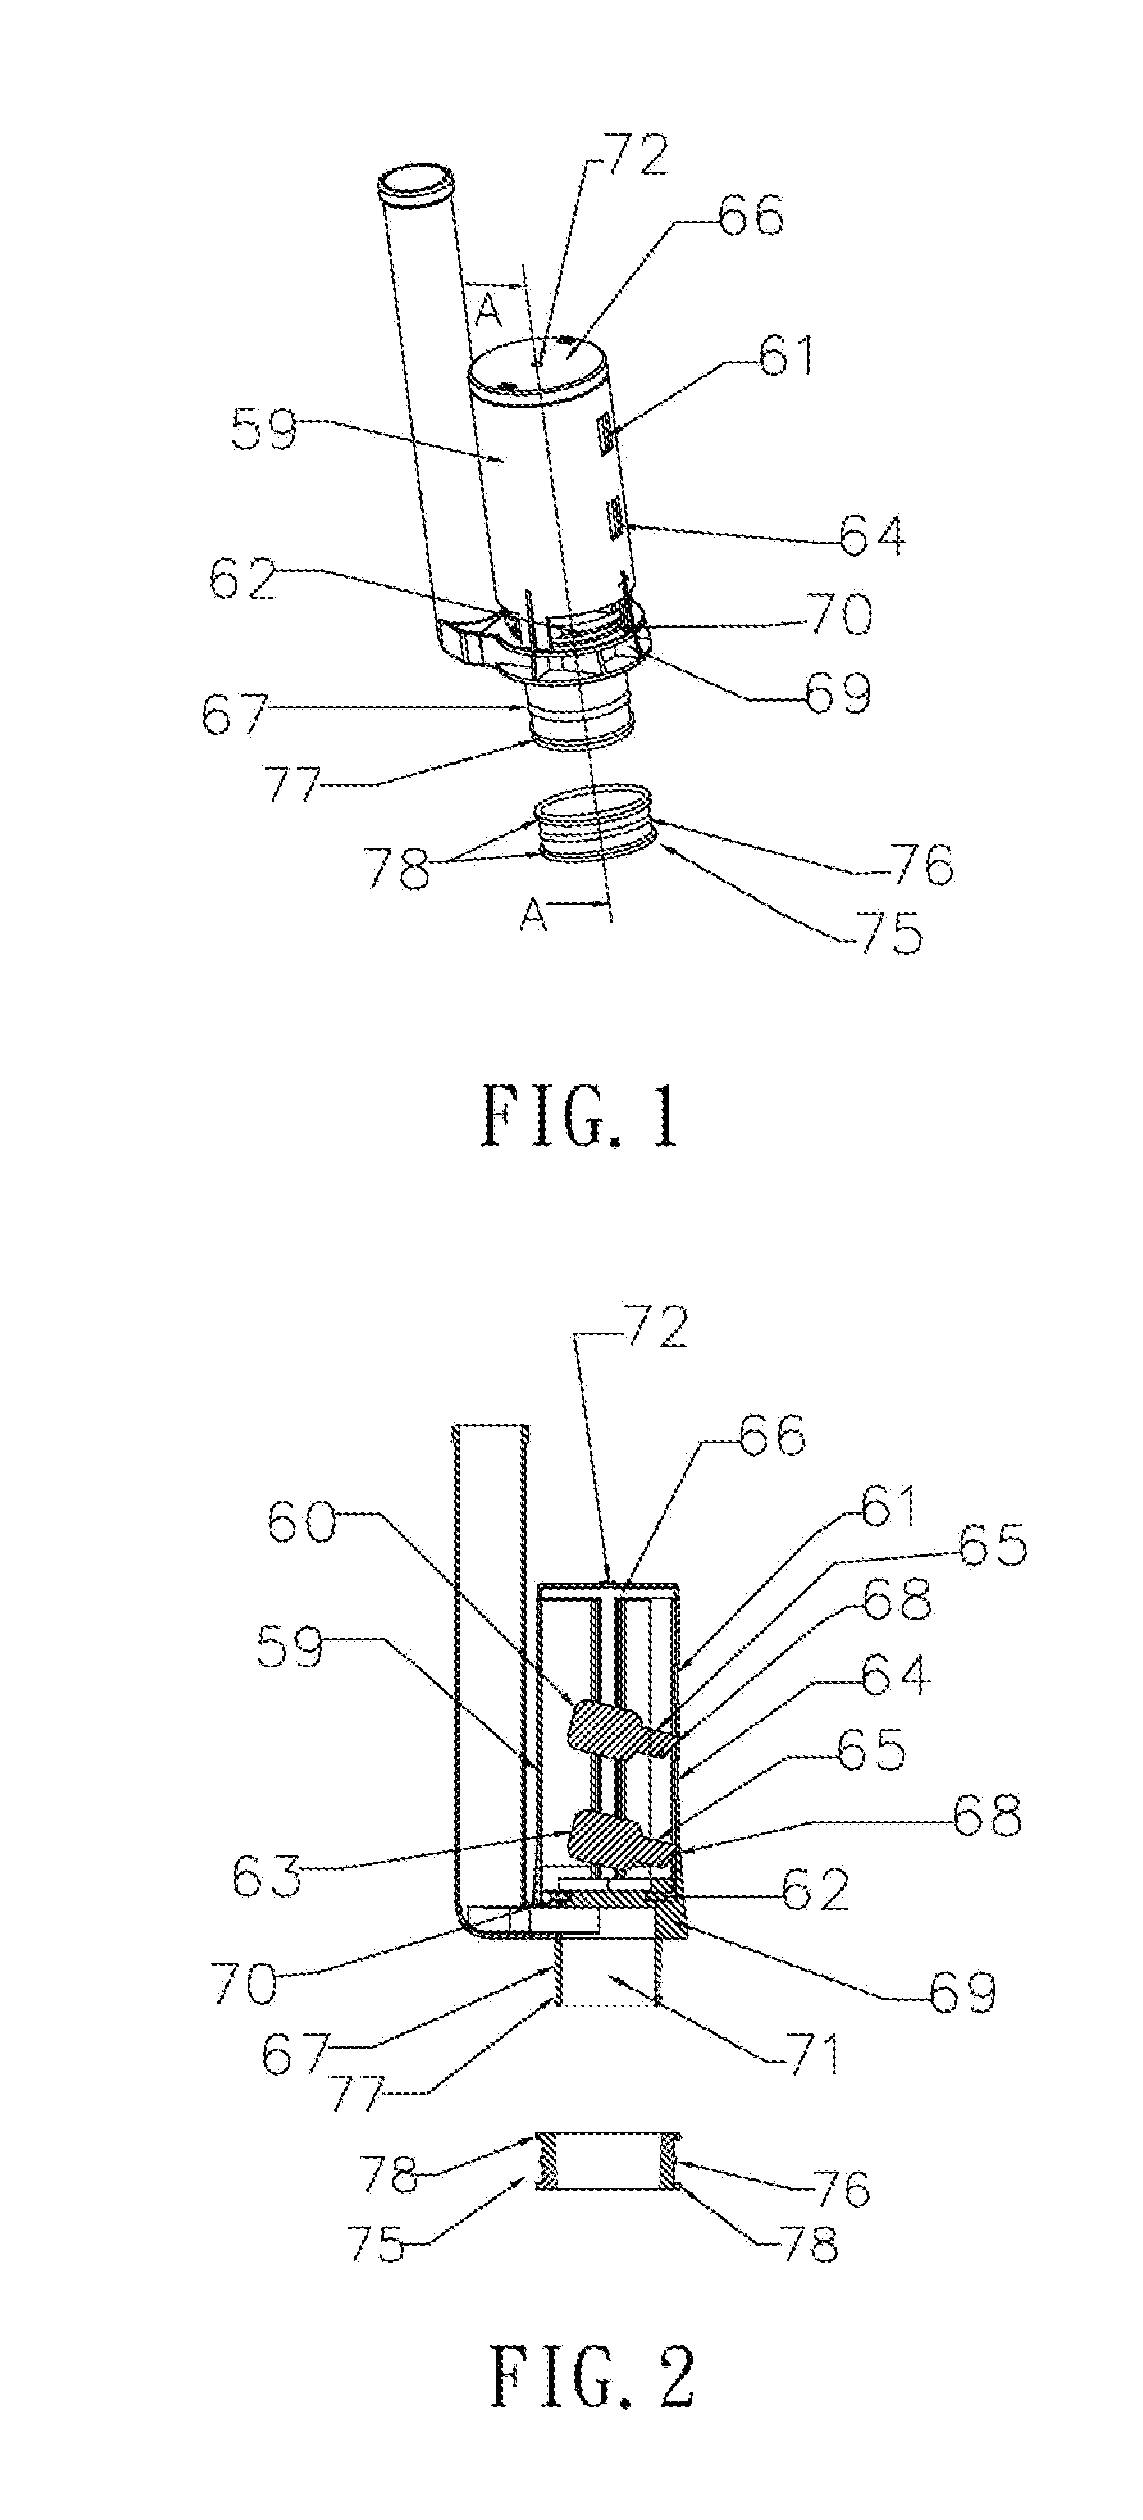 Structural improvement of a water drainer in a cistern